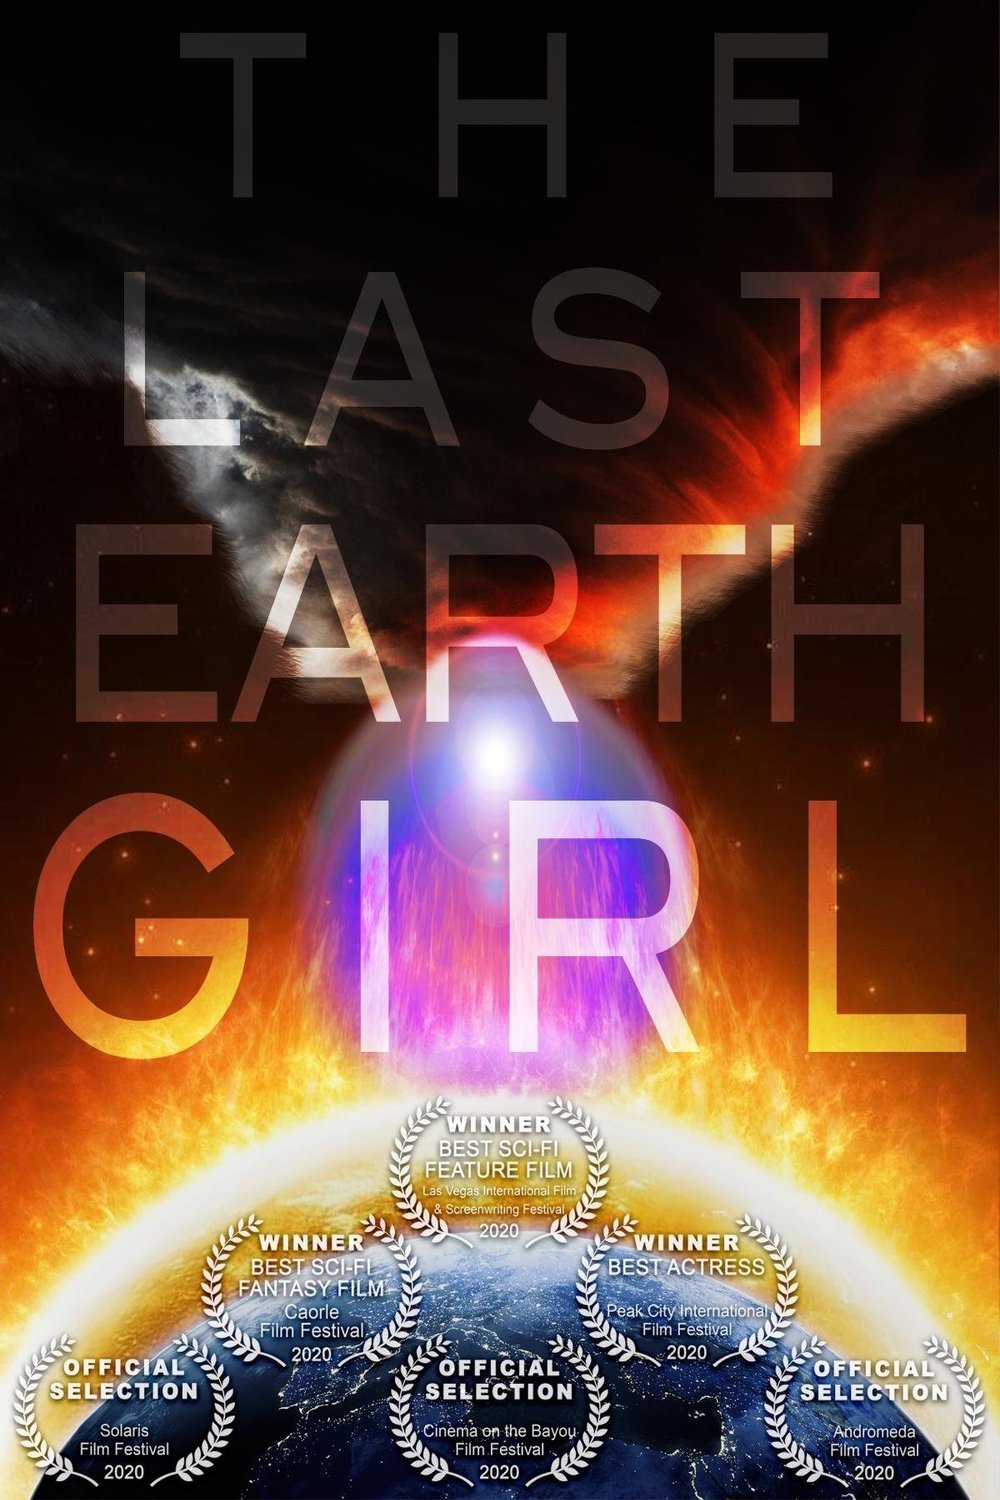 Poster of the movie The Last Earth Girl